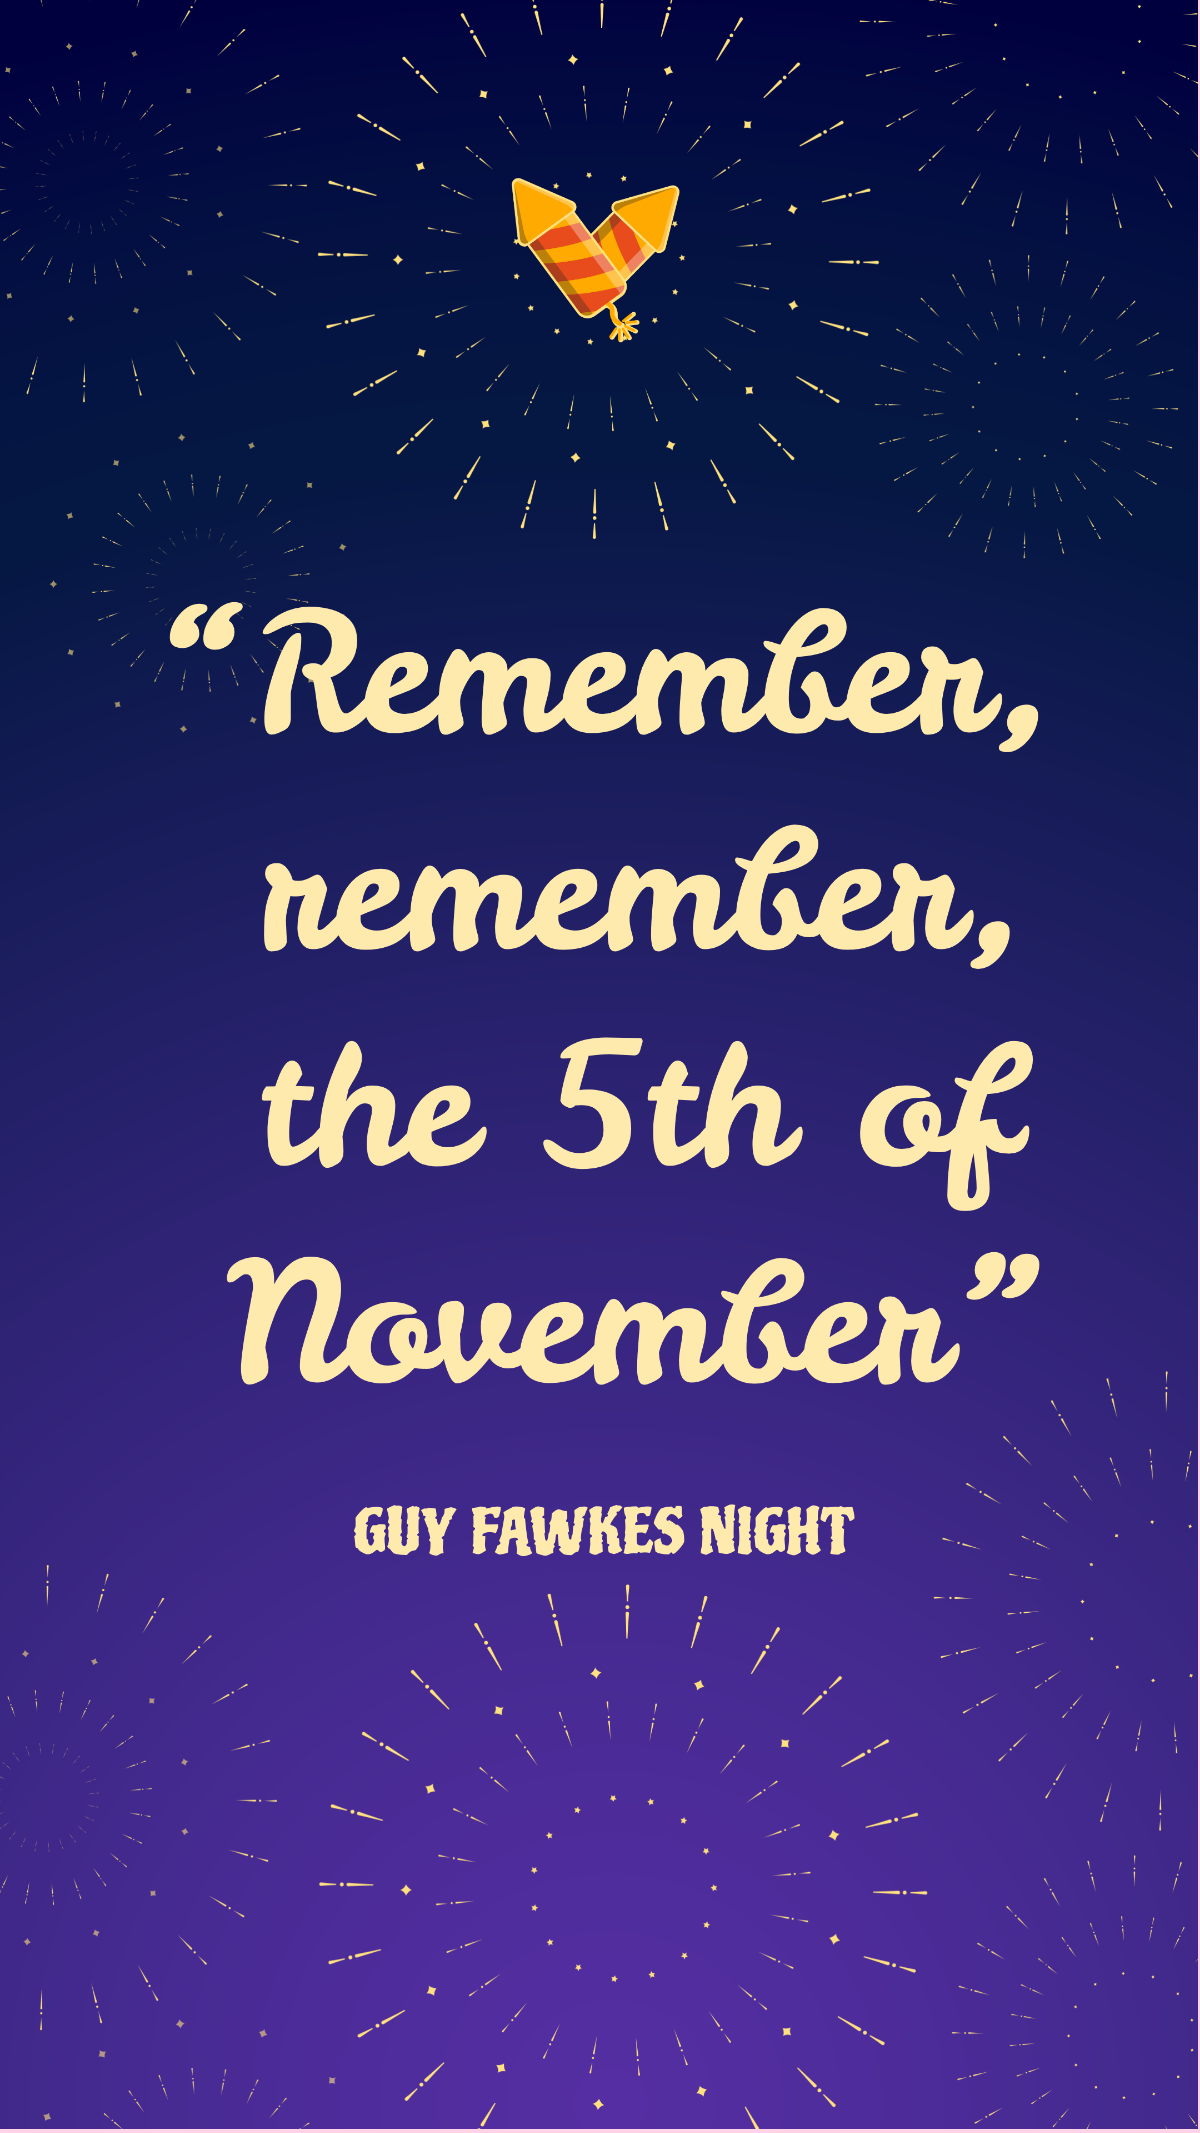 Guy Fawkes Night Quote 